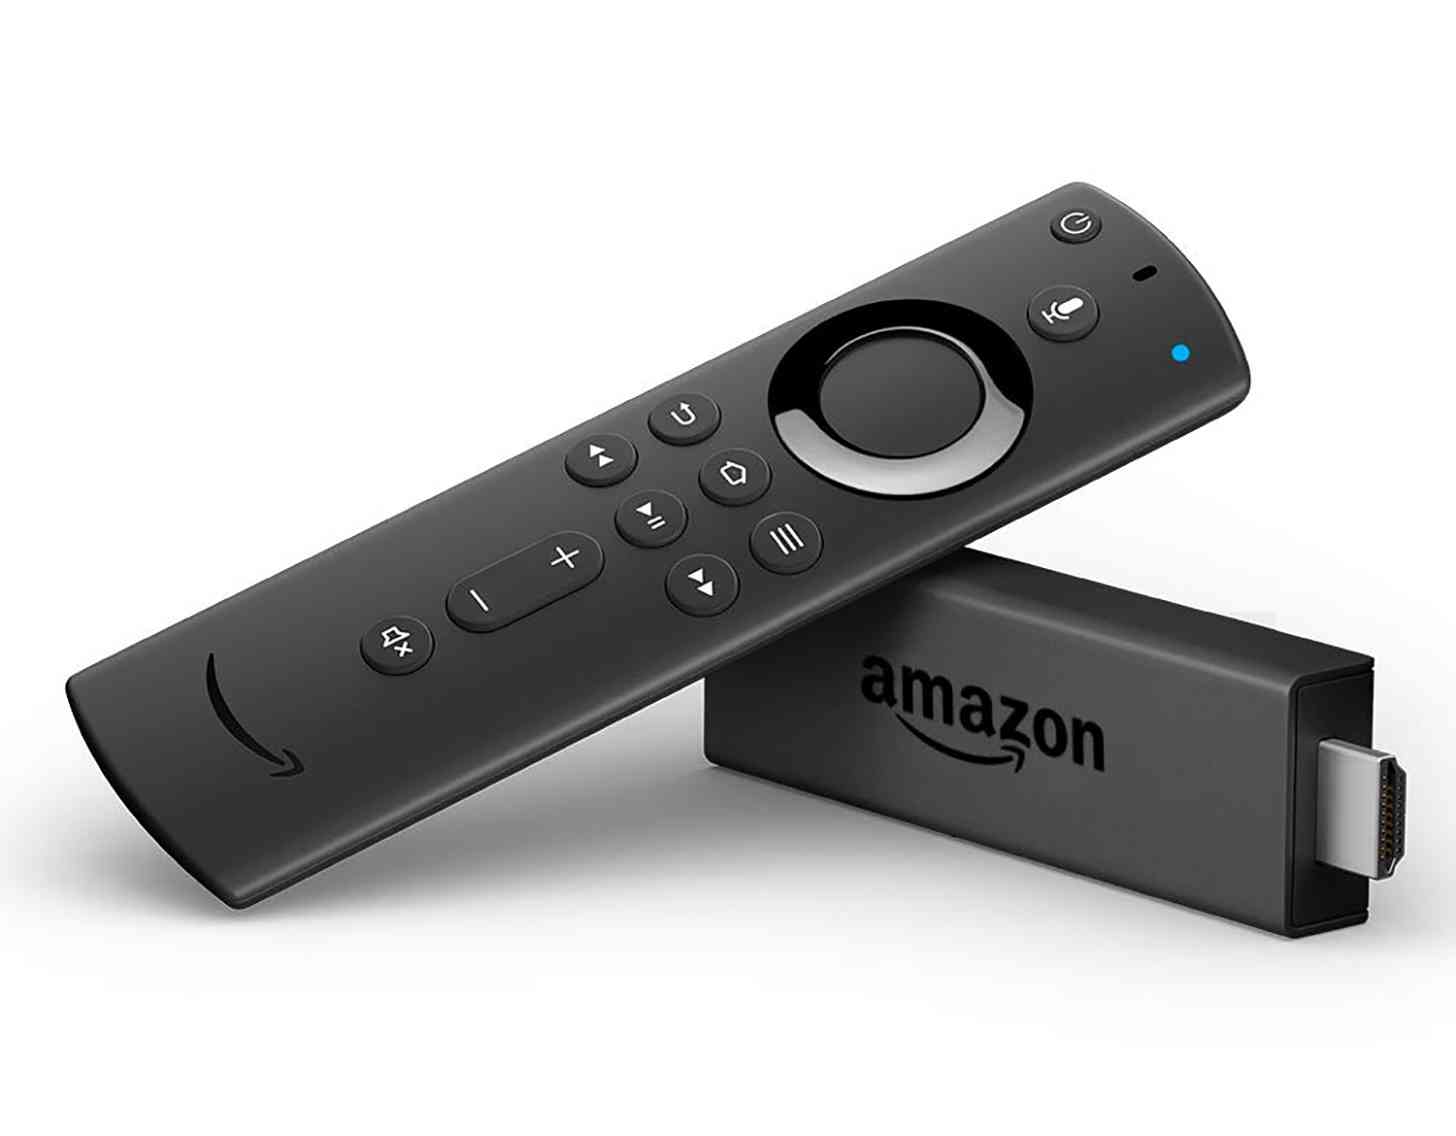 Amazon Fire TV Stick with Remote